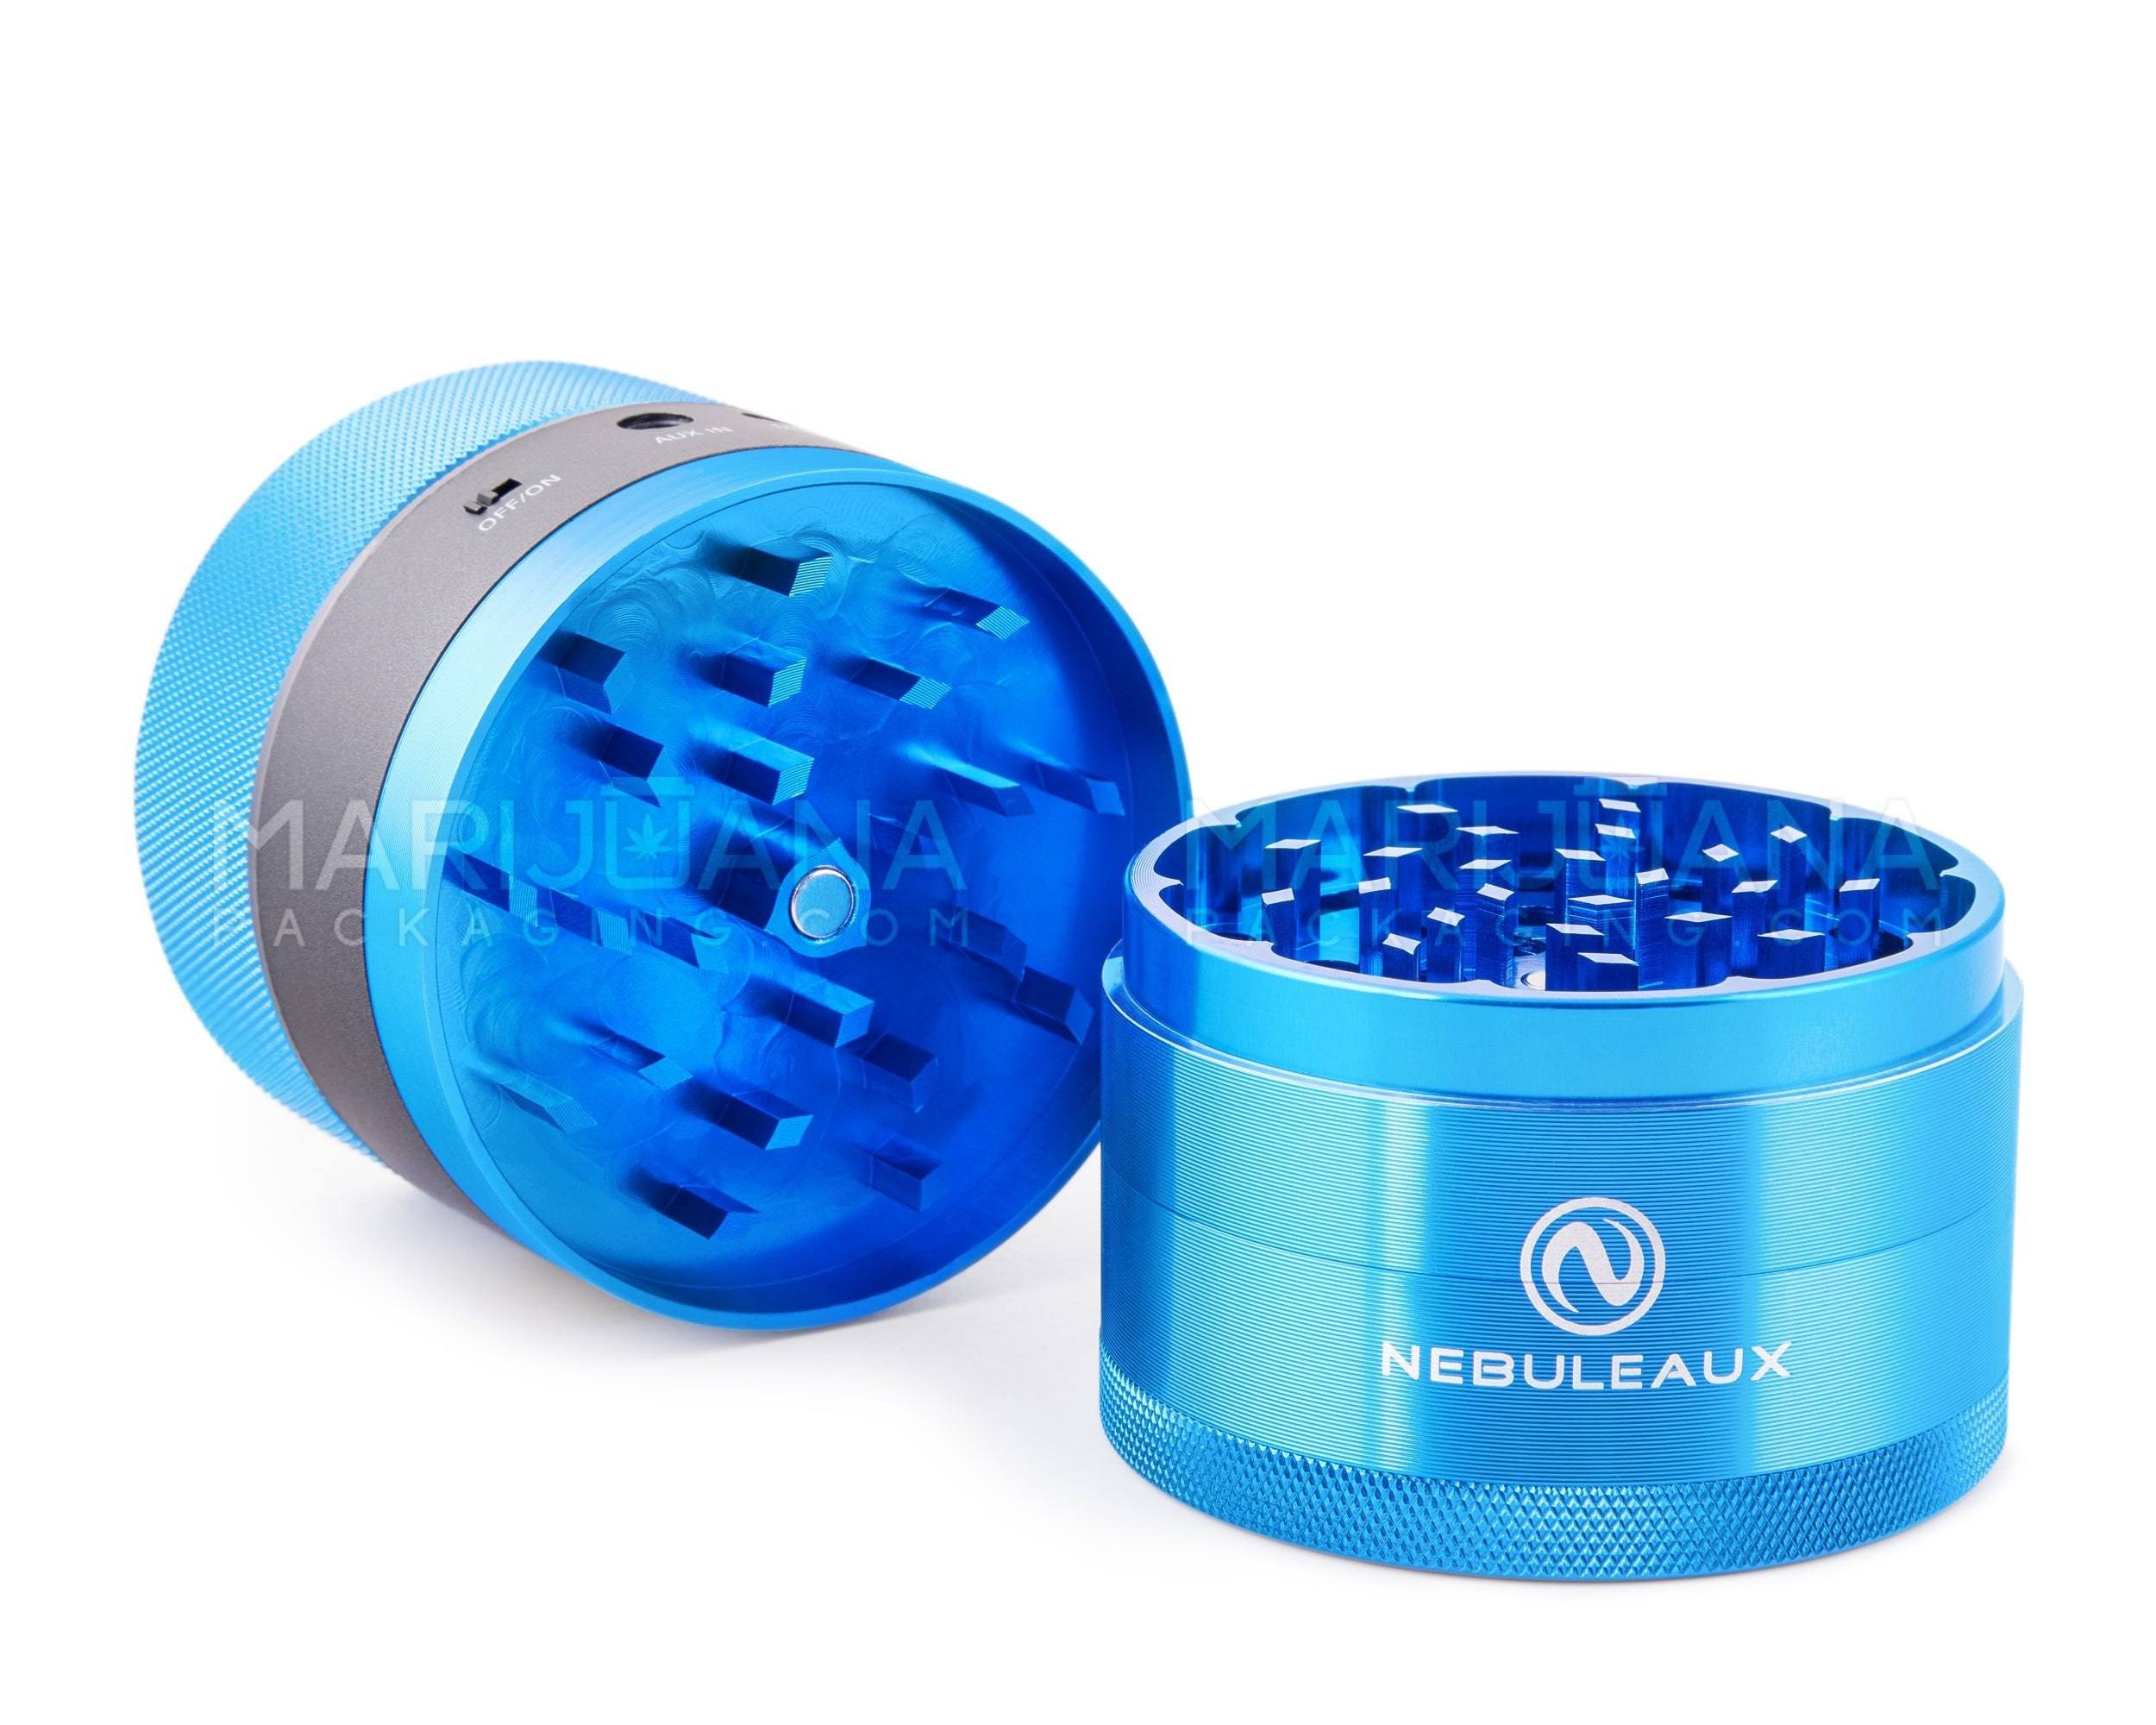 NEBULEAUX | LED Herb Grinder w/ Built-In Wireless Bluetooth Speakers | 4 Piece - 62mm - Blue - 3